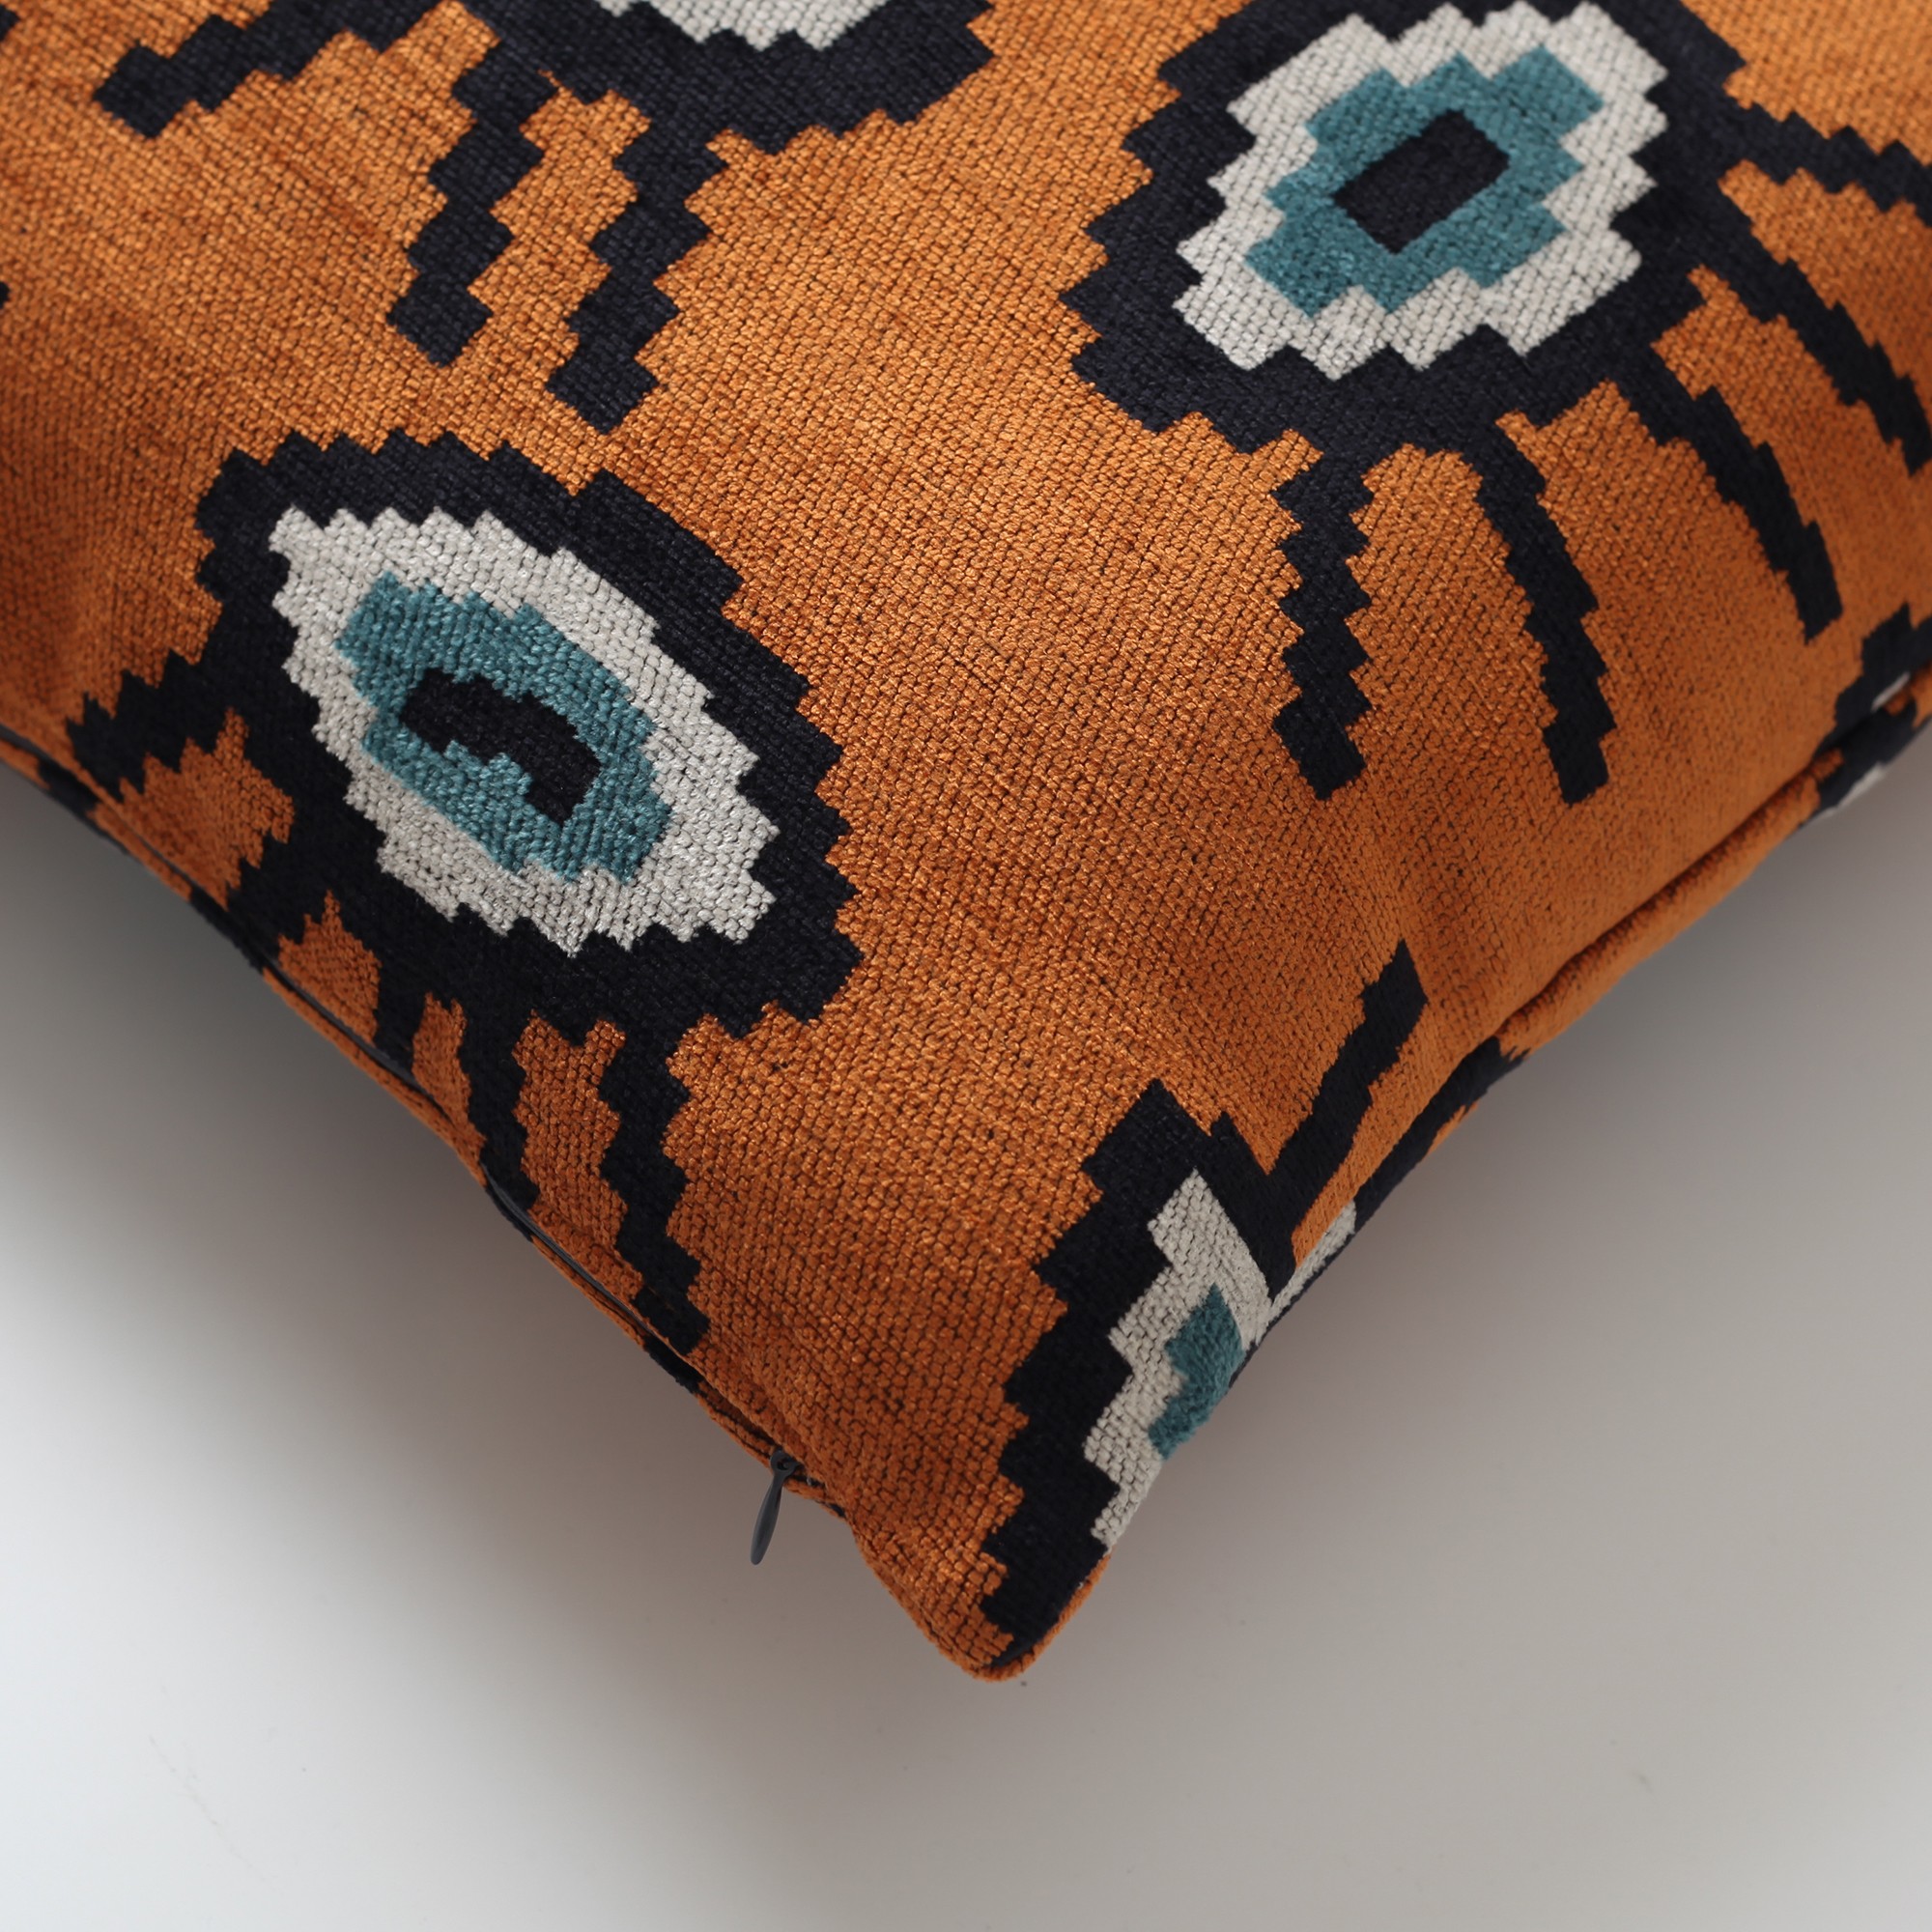 " Yonobi " - Eye Patterned Throw Pillow 18x18 Inch - Orange (Cover Only)